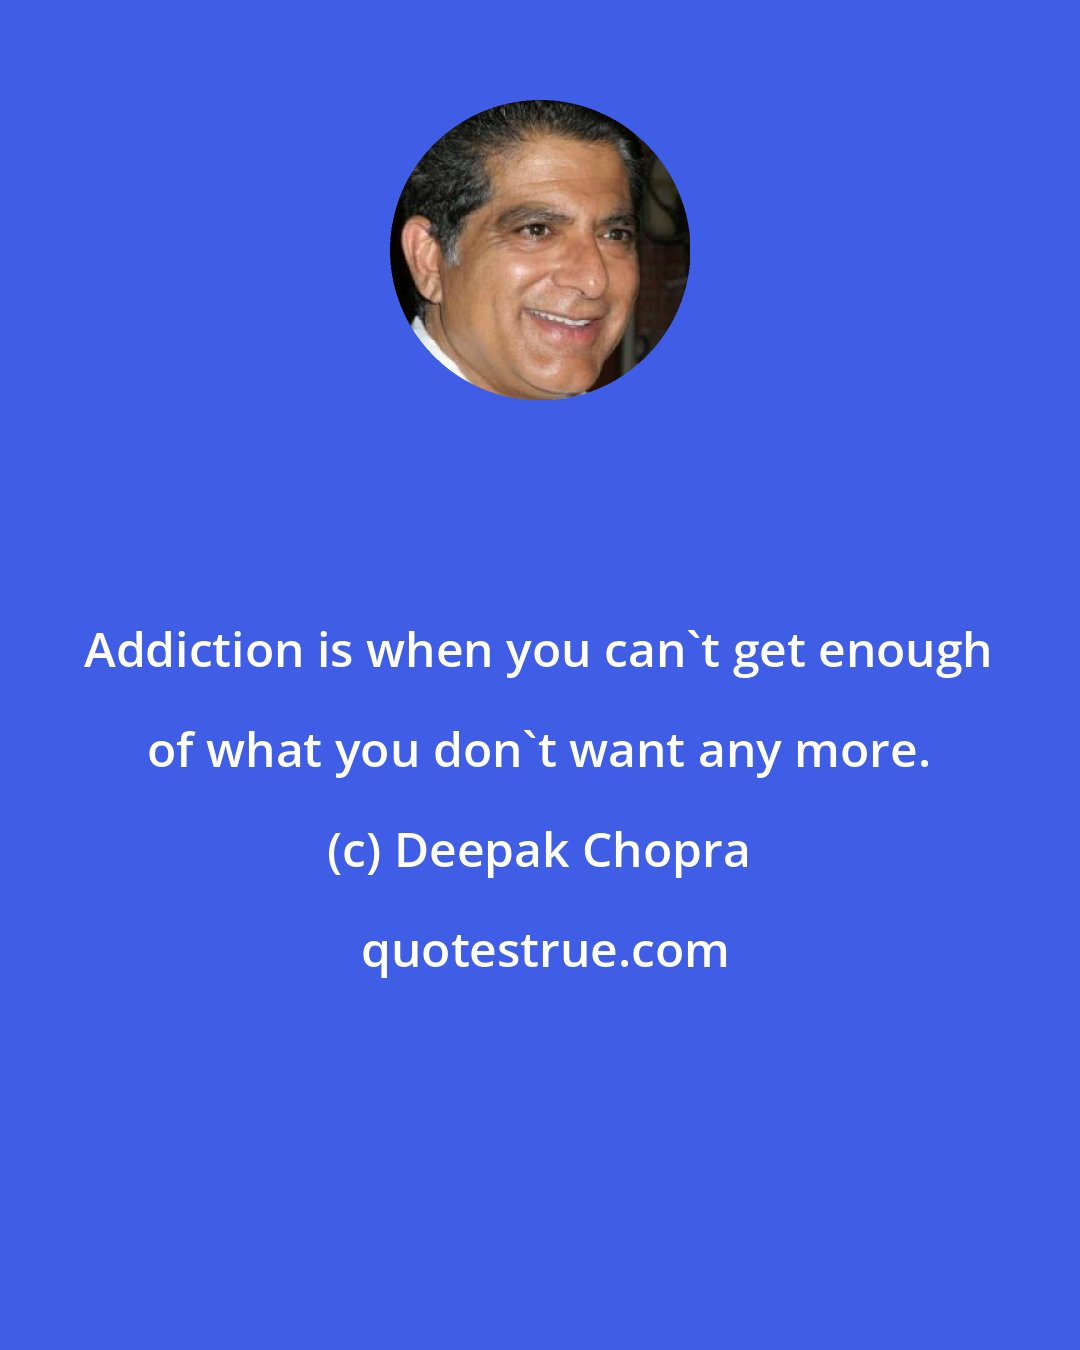 Deepak Chopra: Addiction is when you can't get enough of what you don't want any more.